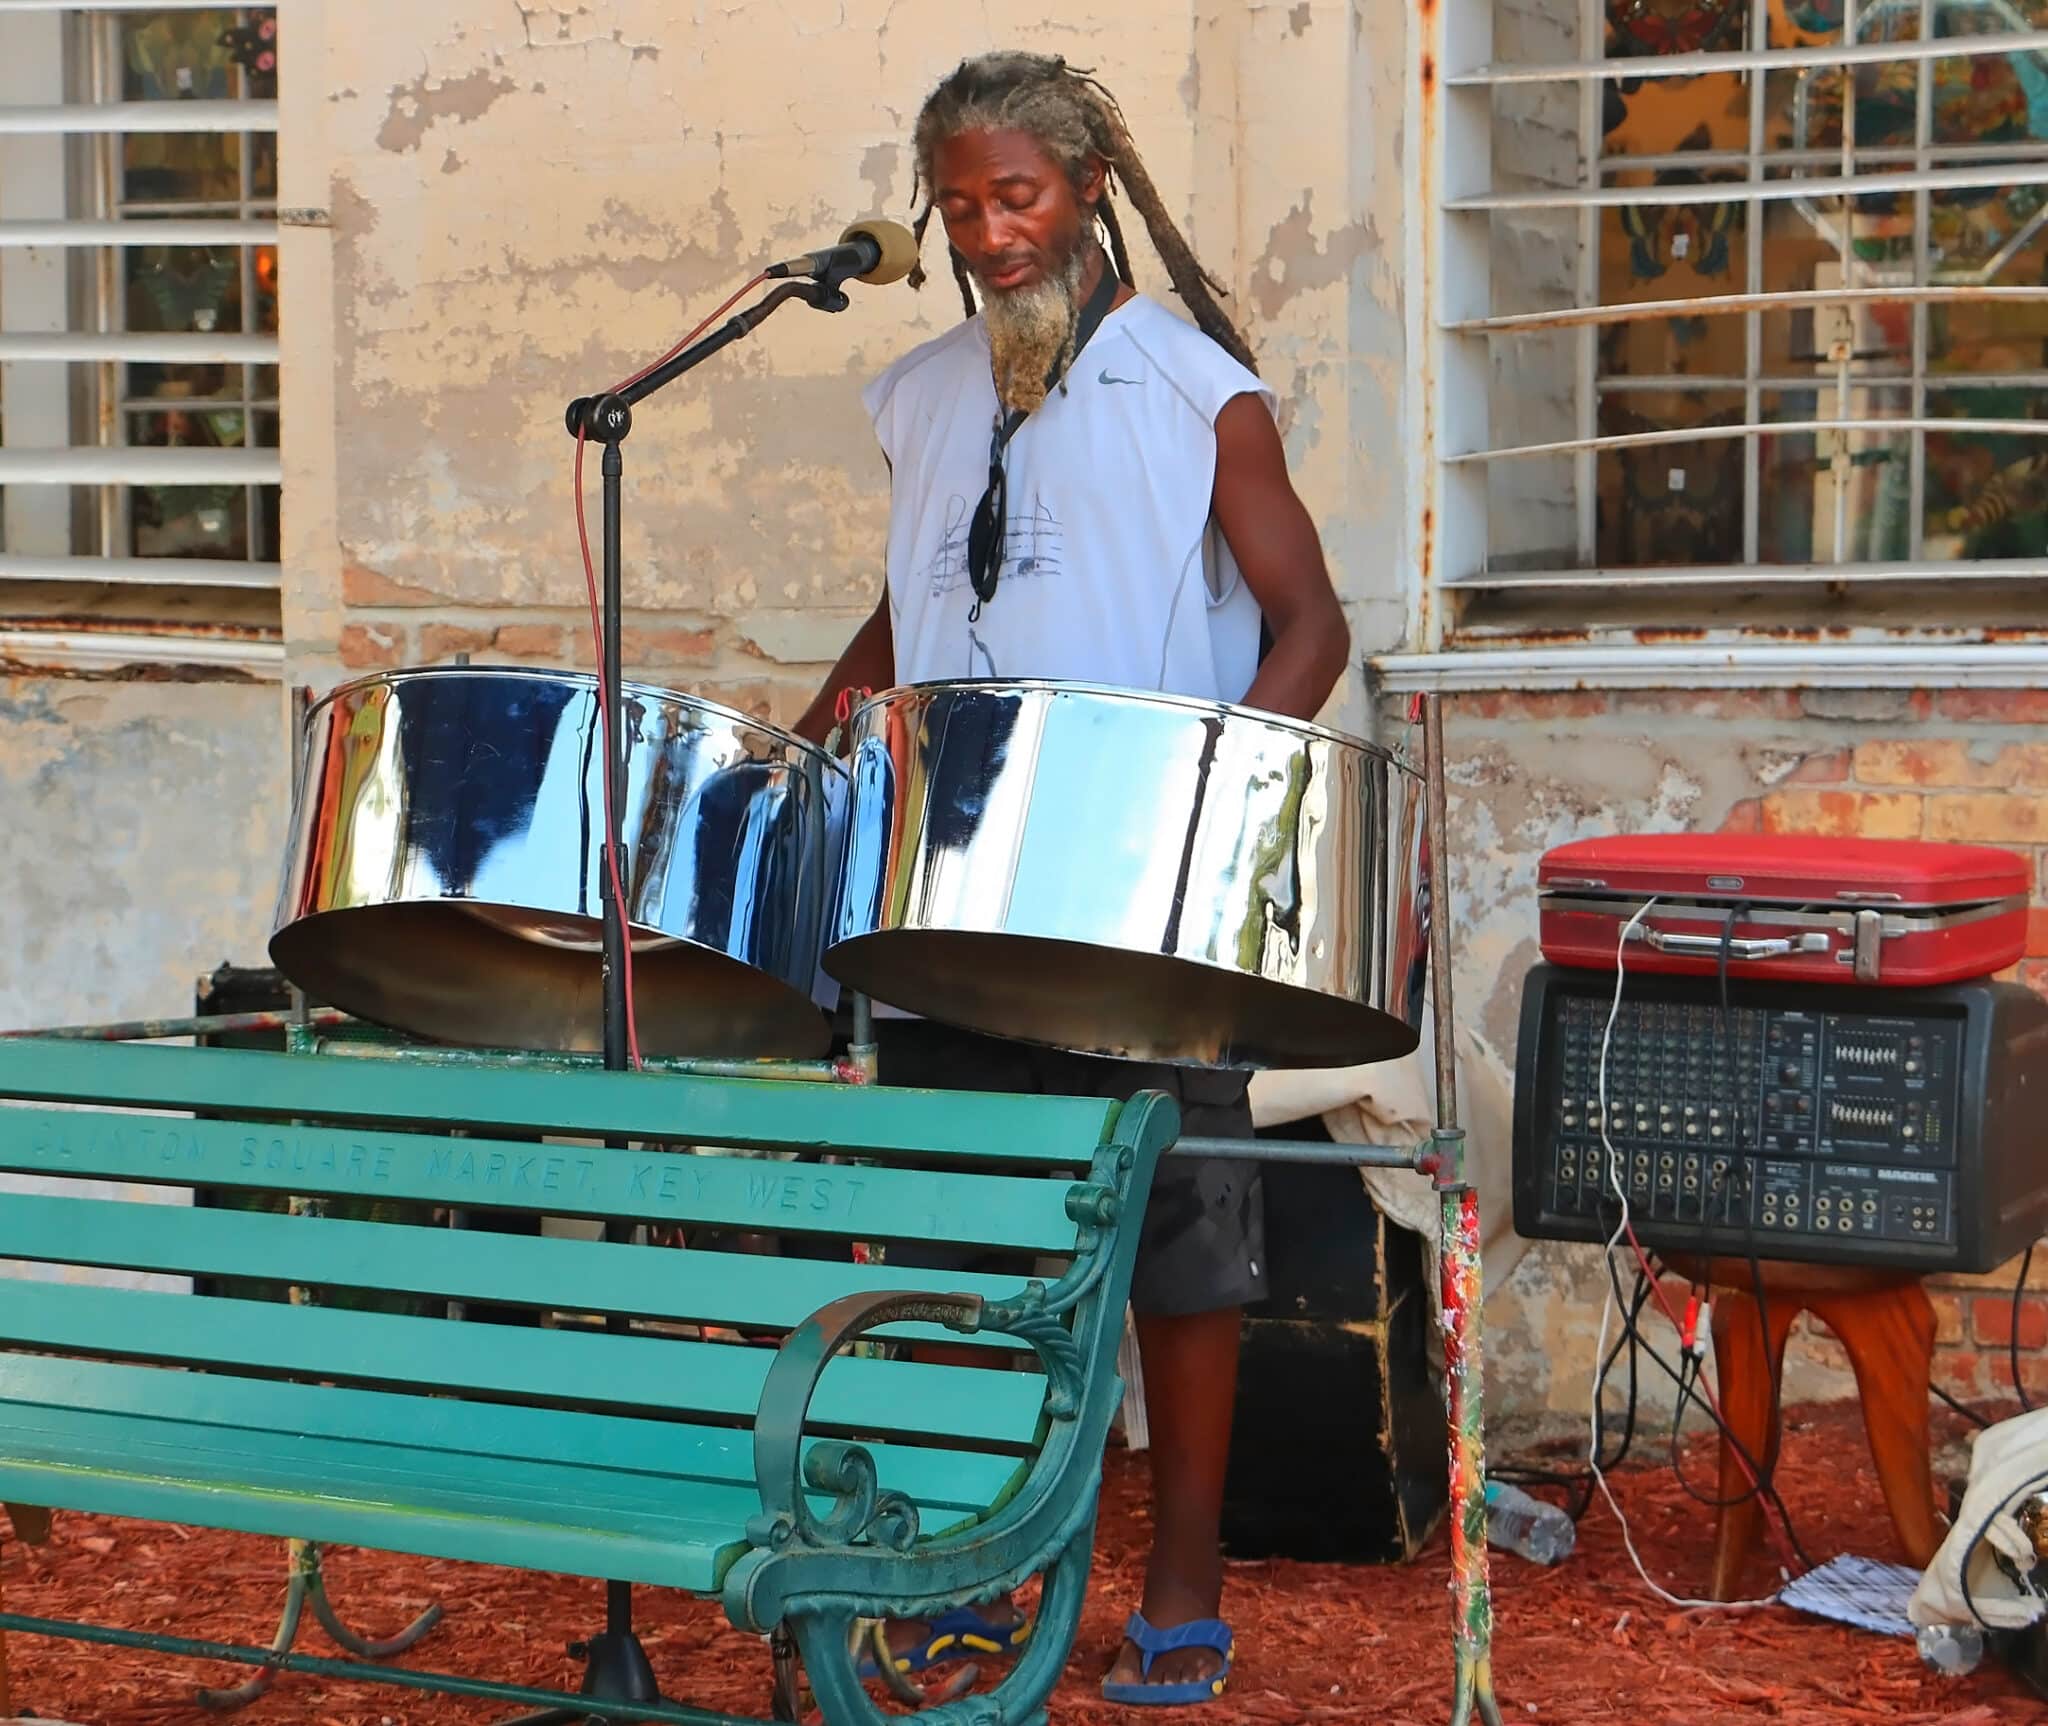 Street performer in front of Customs House near Mallory Square (Credit: Bill Rockwell)